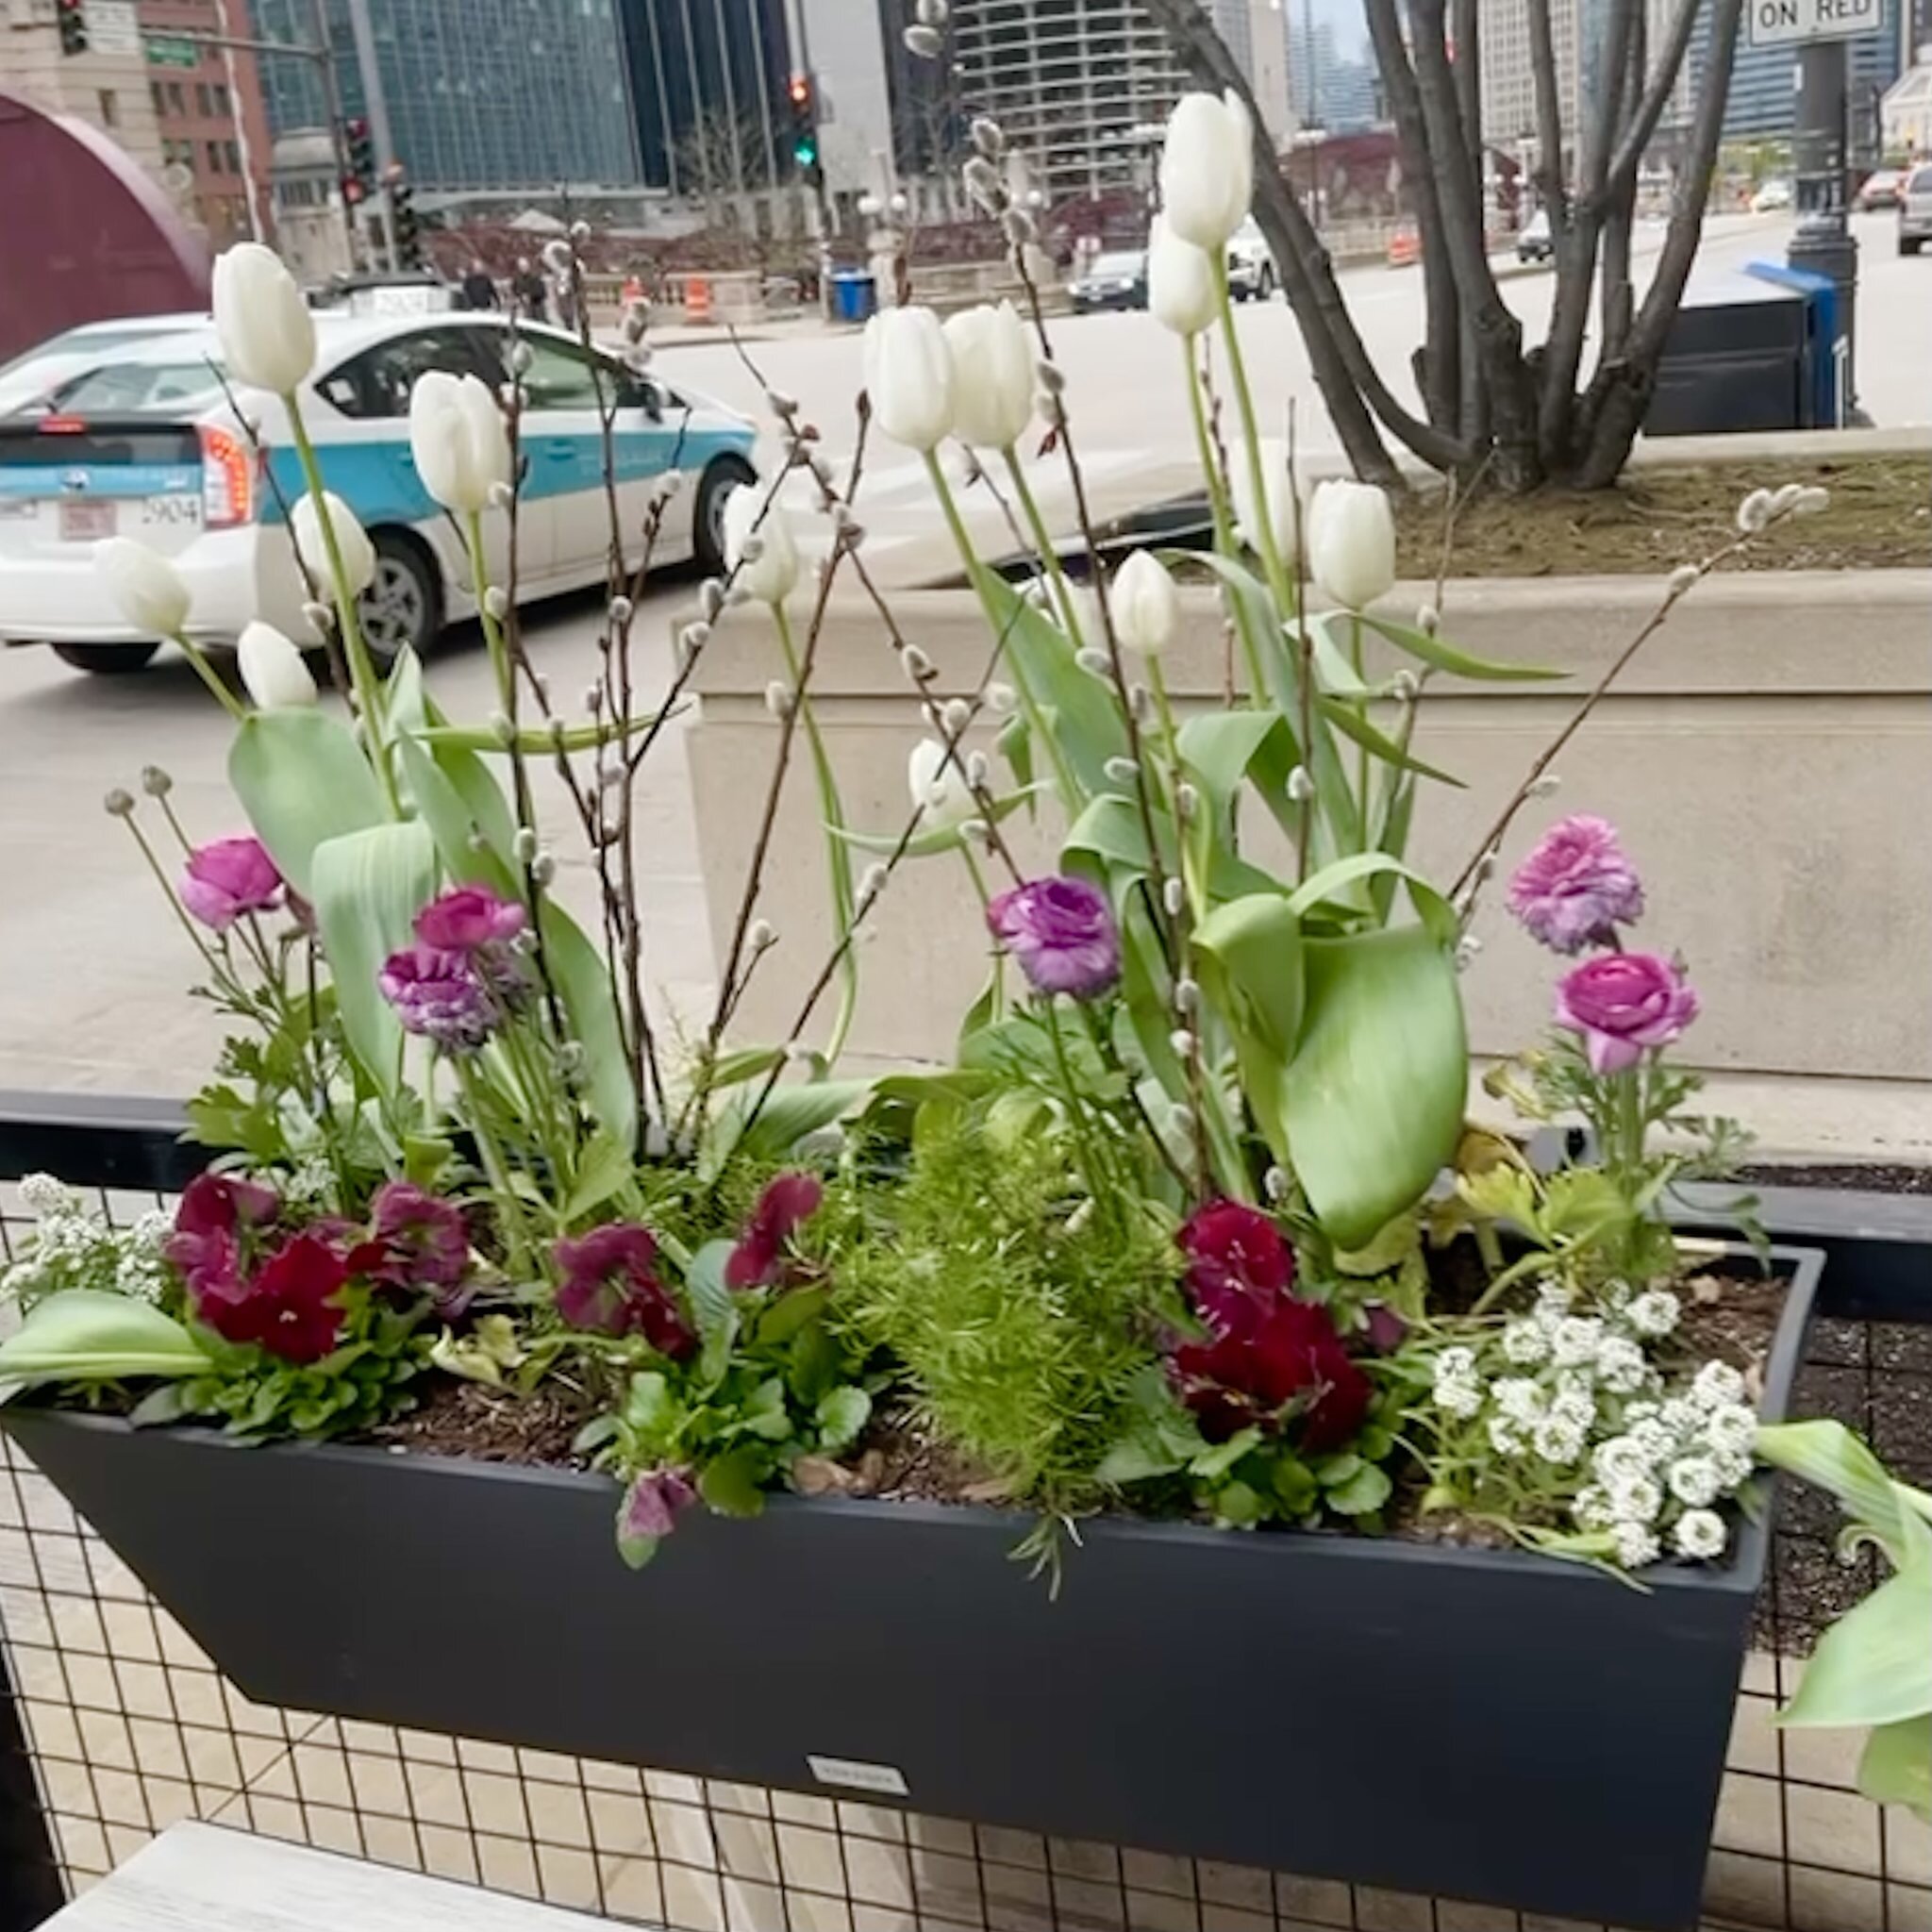 Here's a cute #springplanter spotted in #Chicago. DIY with white #tulips, pink #ranunculus, burgundy #pansies, asparagus fern, and sweet #alyssum. The sprays of #pussywillow are a clever touch that add height, texture, and whimsy.